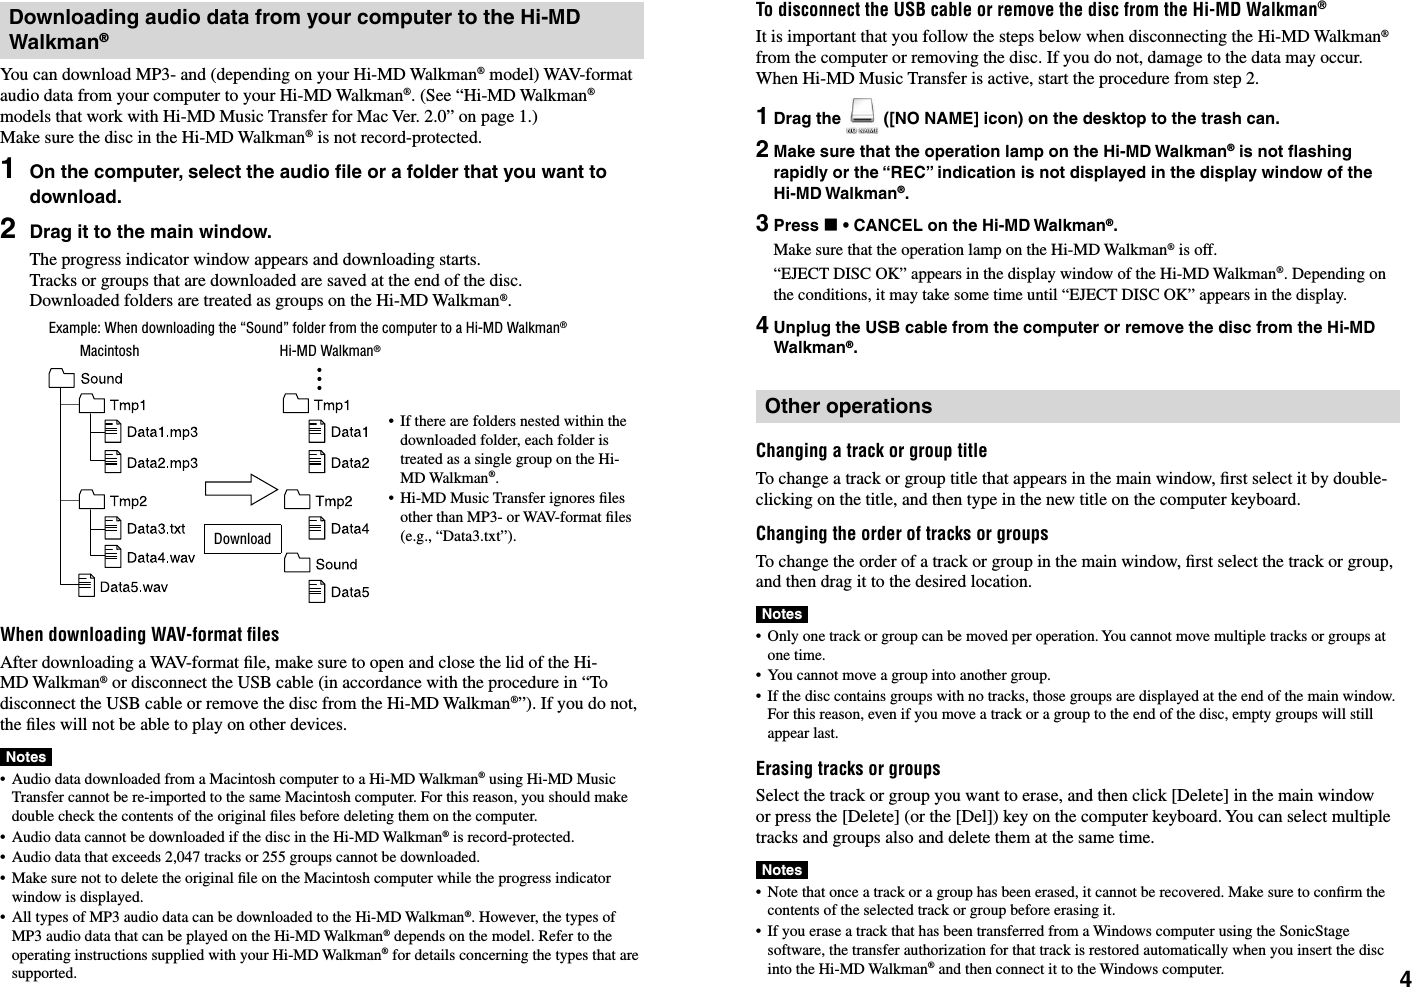 Page 4 of 6 - Sony MZ-M100 Hi-MD Music Transfer For Mac Ver. 2.0 Version 2 (User Manual) Hi MD2 Manual